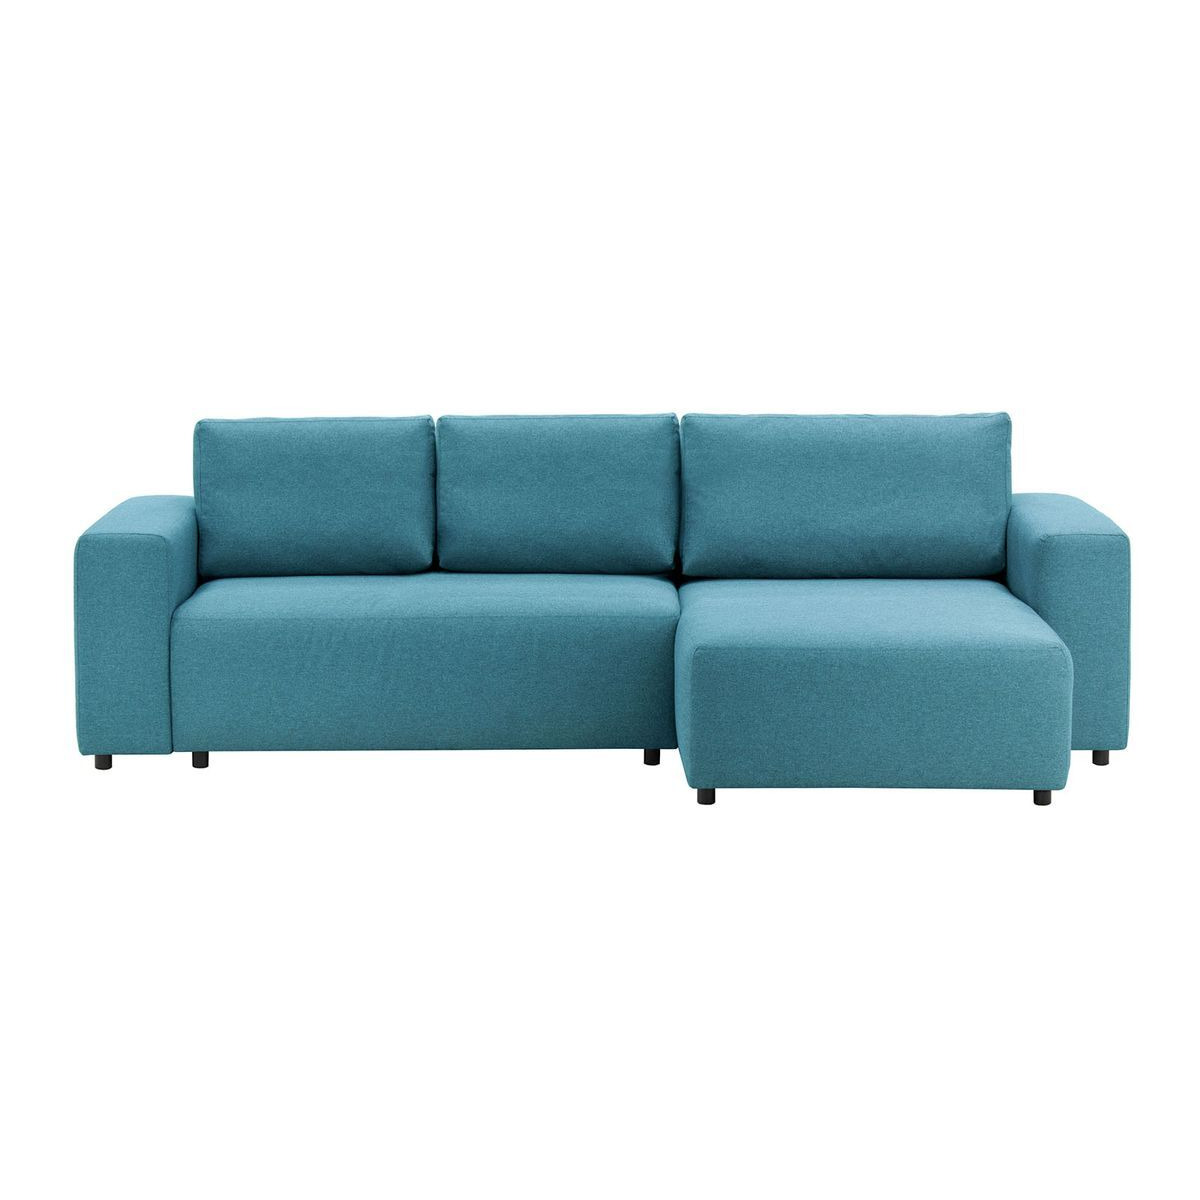 Solace Right Hand Corner Sofa Bed, turquoise - image 1